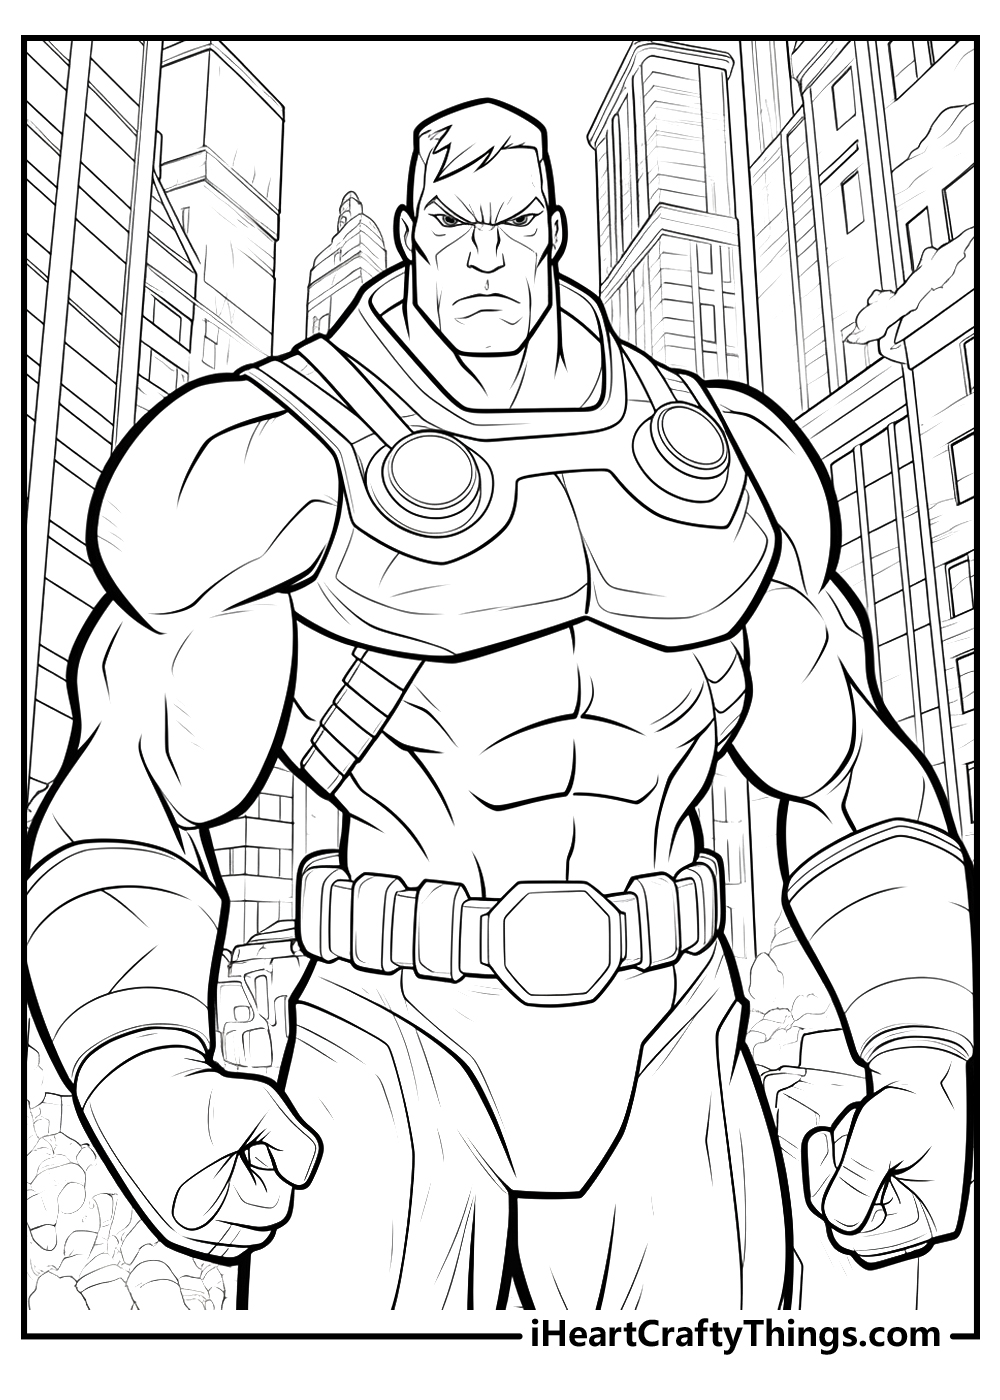 Superhero coloring pages free printables